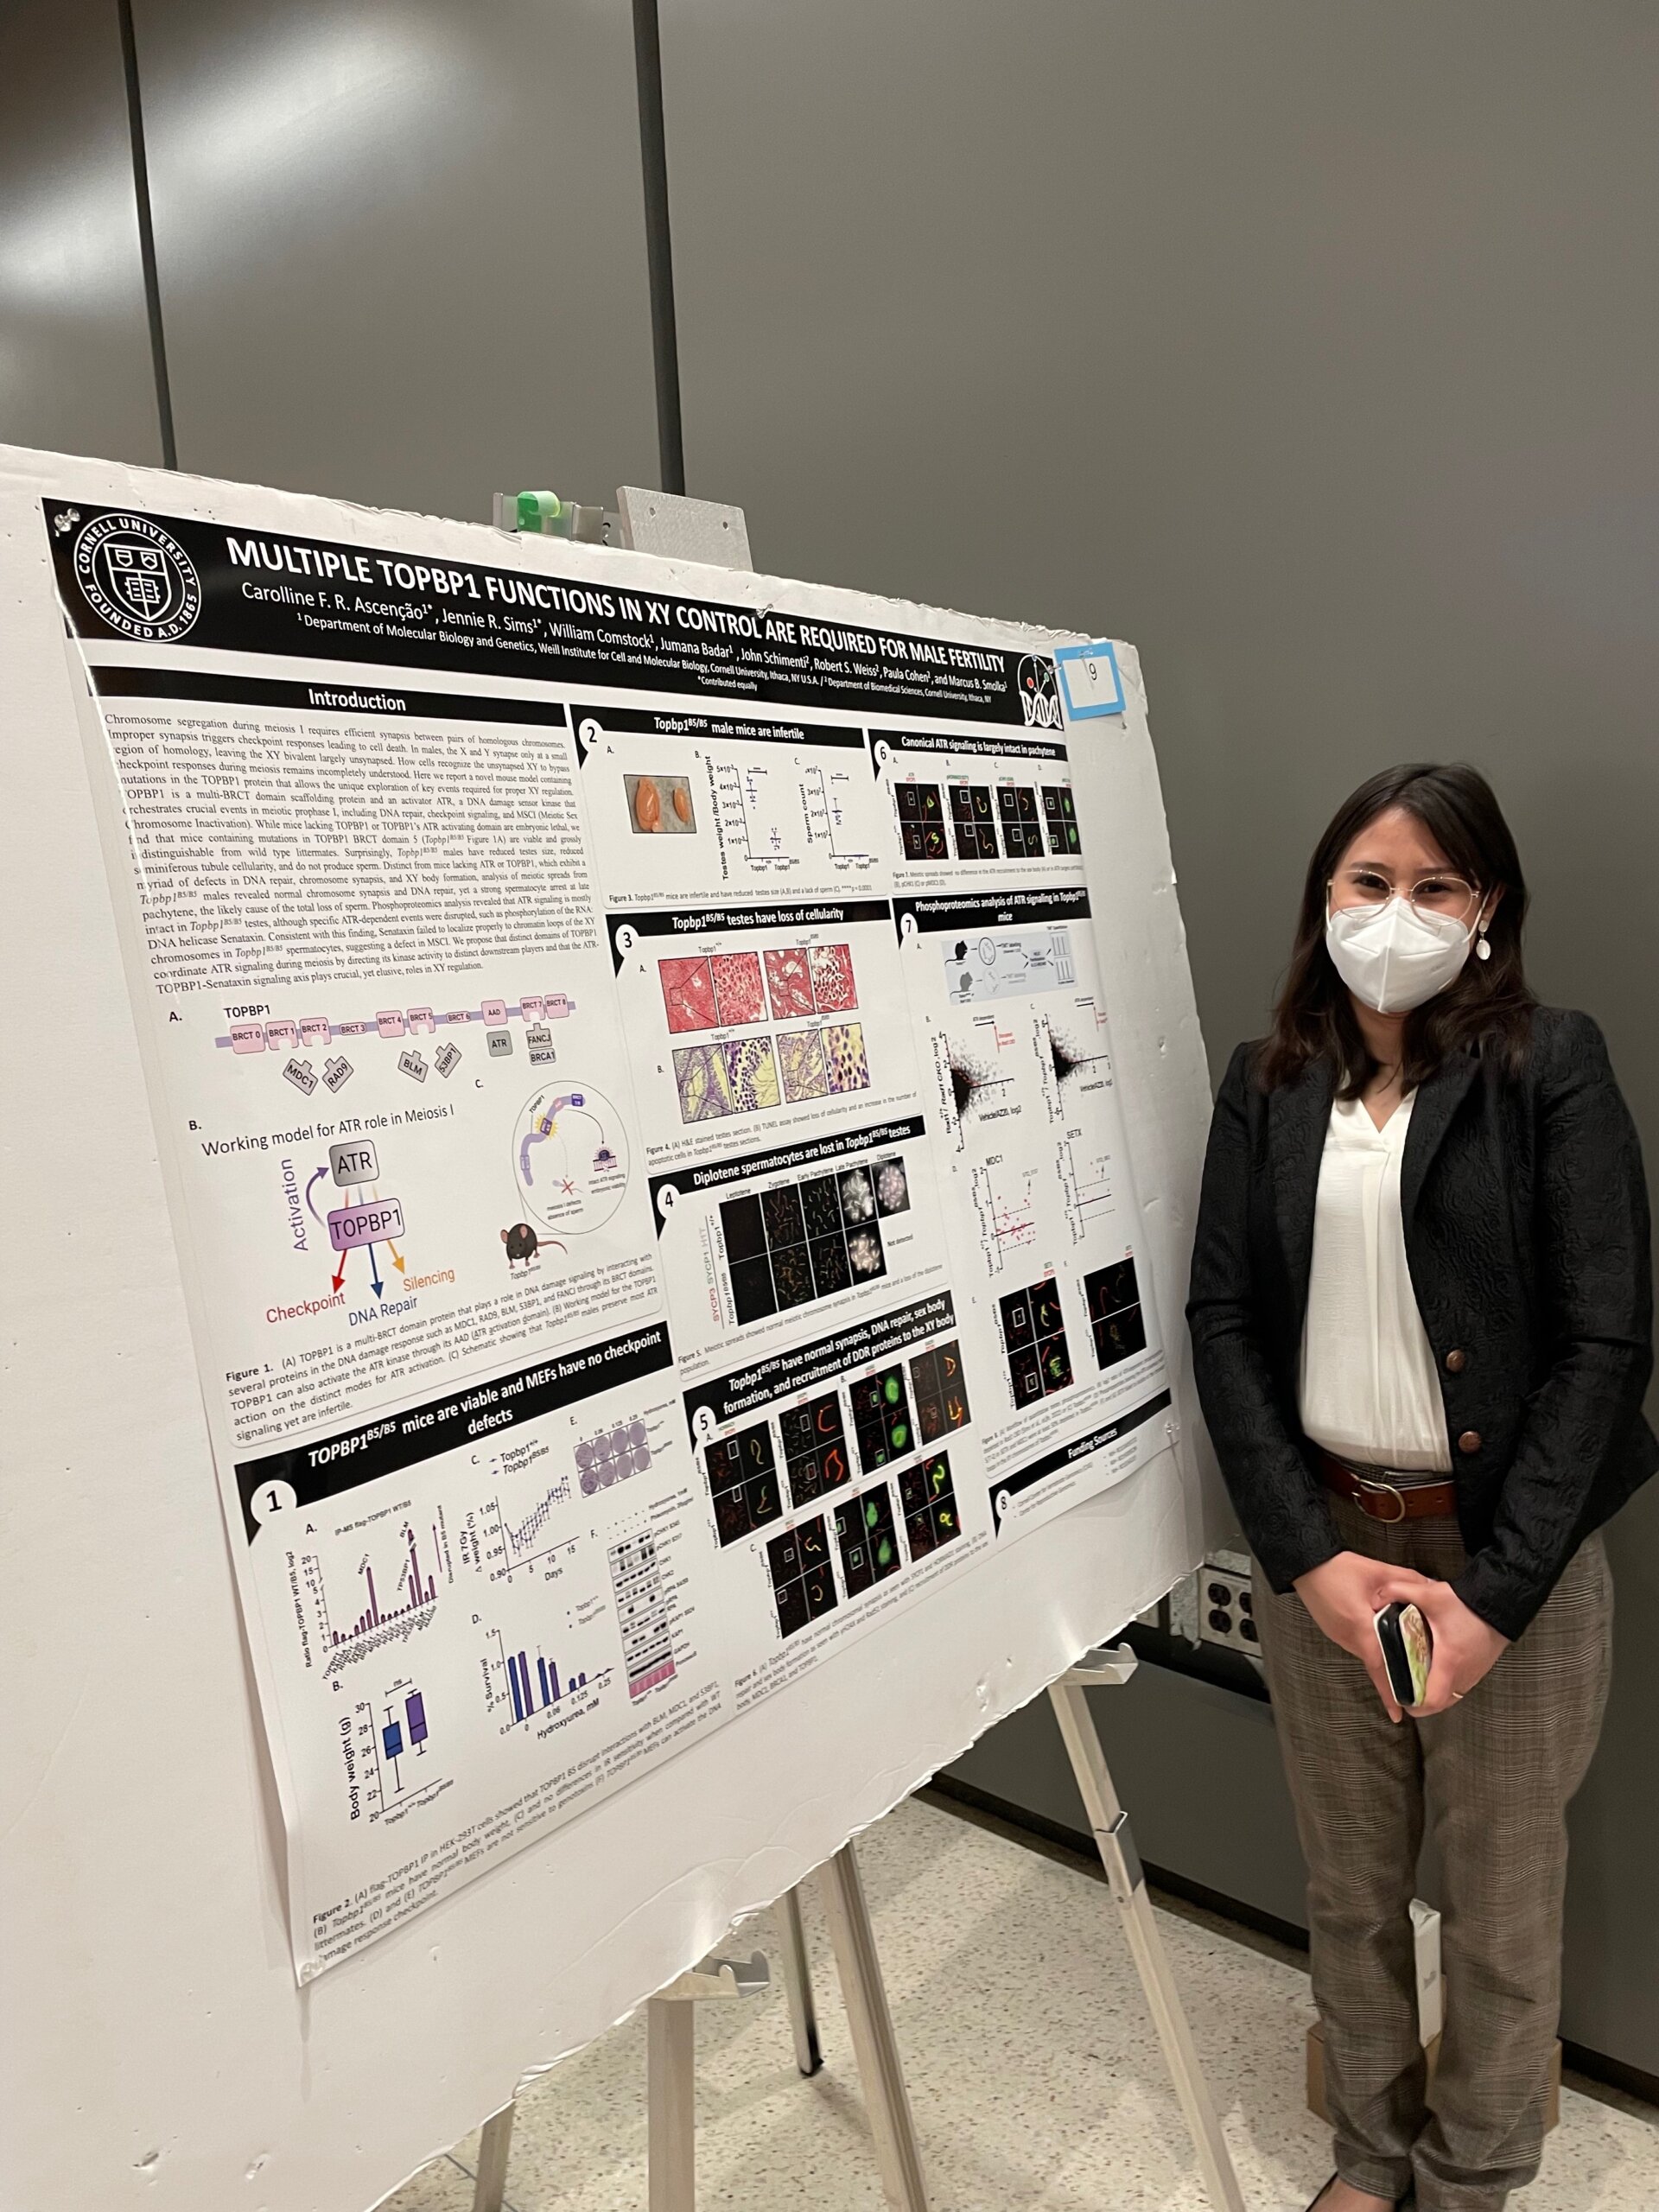 Dr. Carrolline Ascencao posing in front of her poster, entitled “Multiple TOPBP1 functions in XY control are required for male fertility” Image